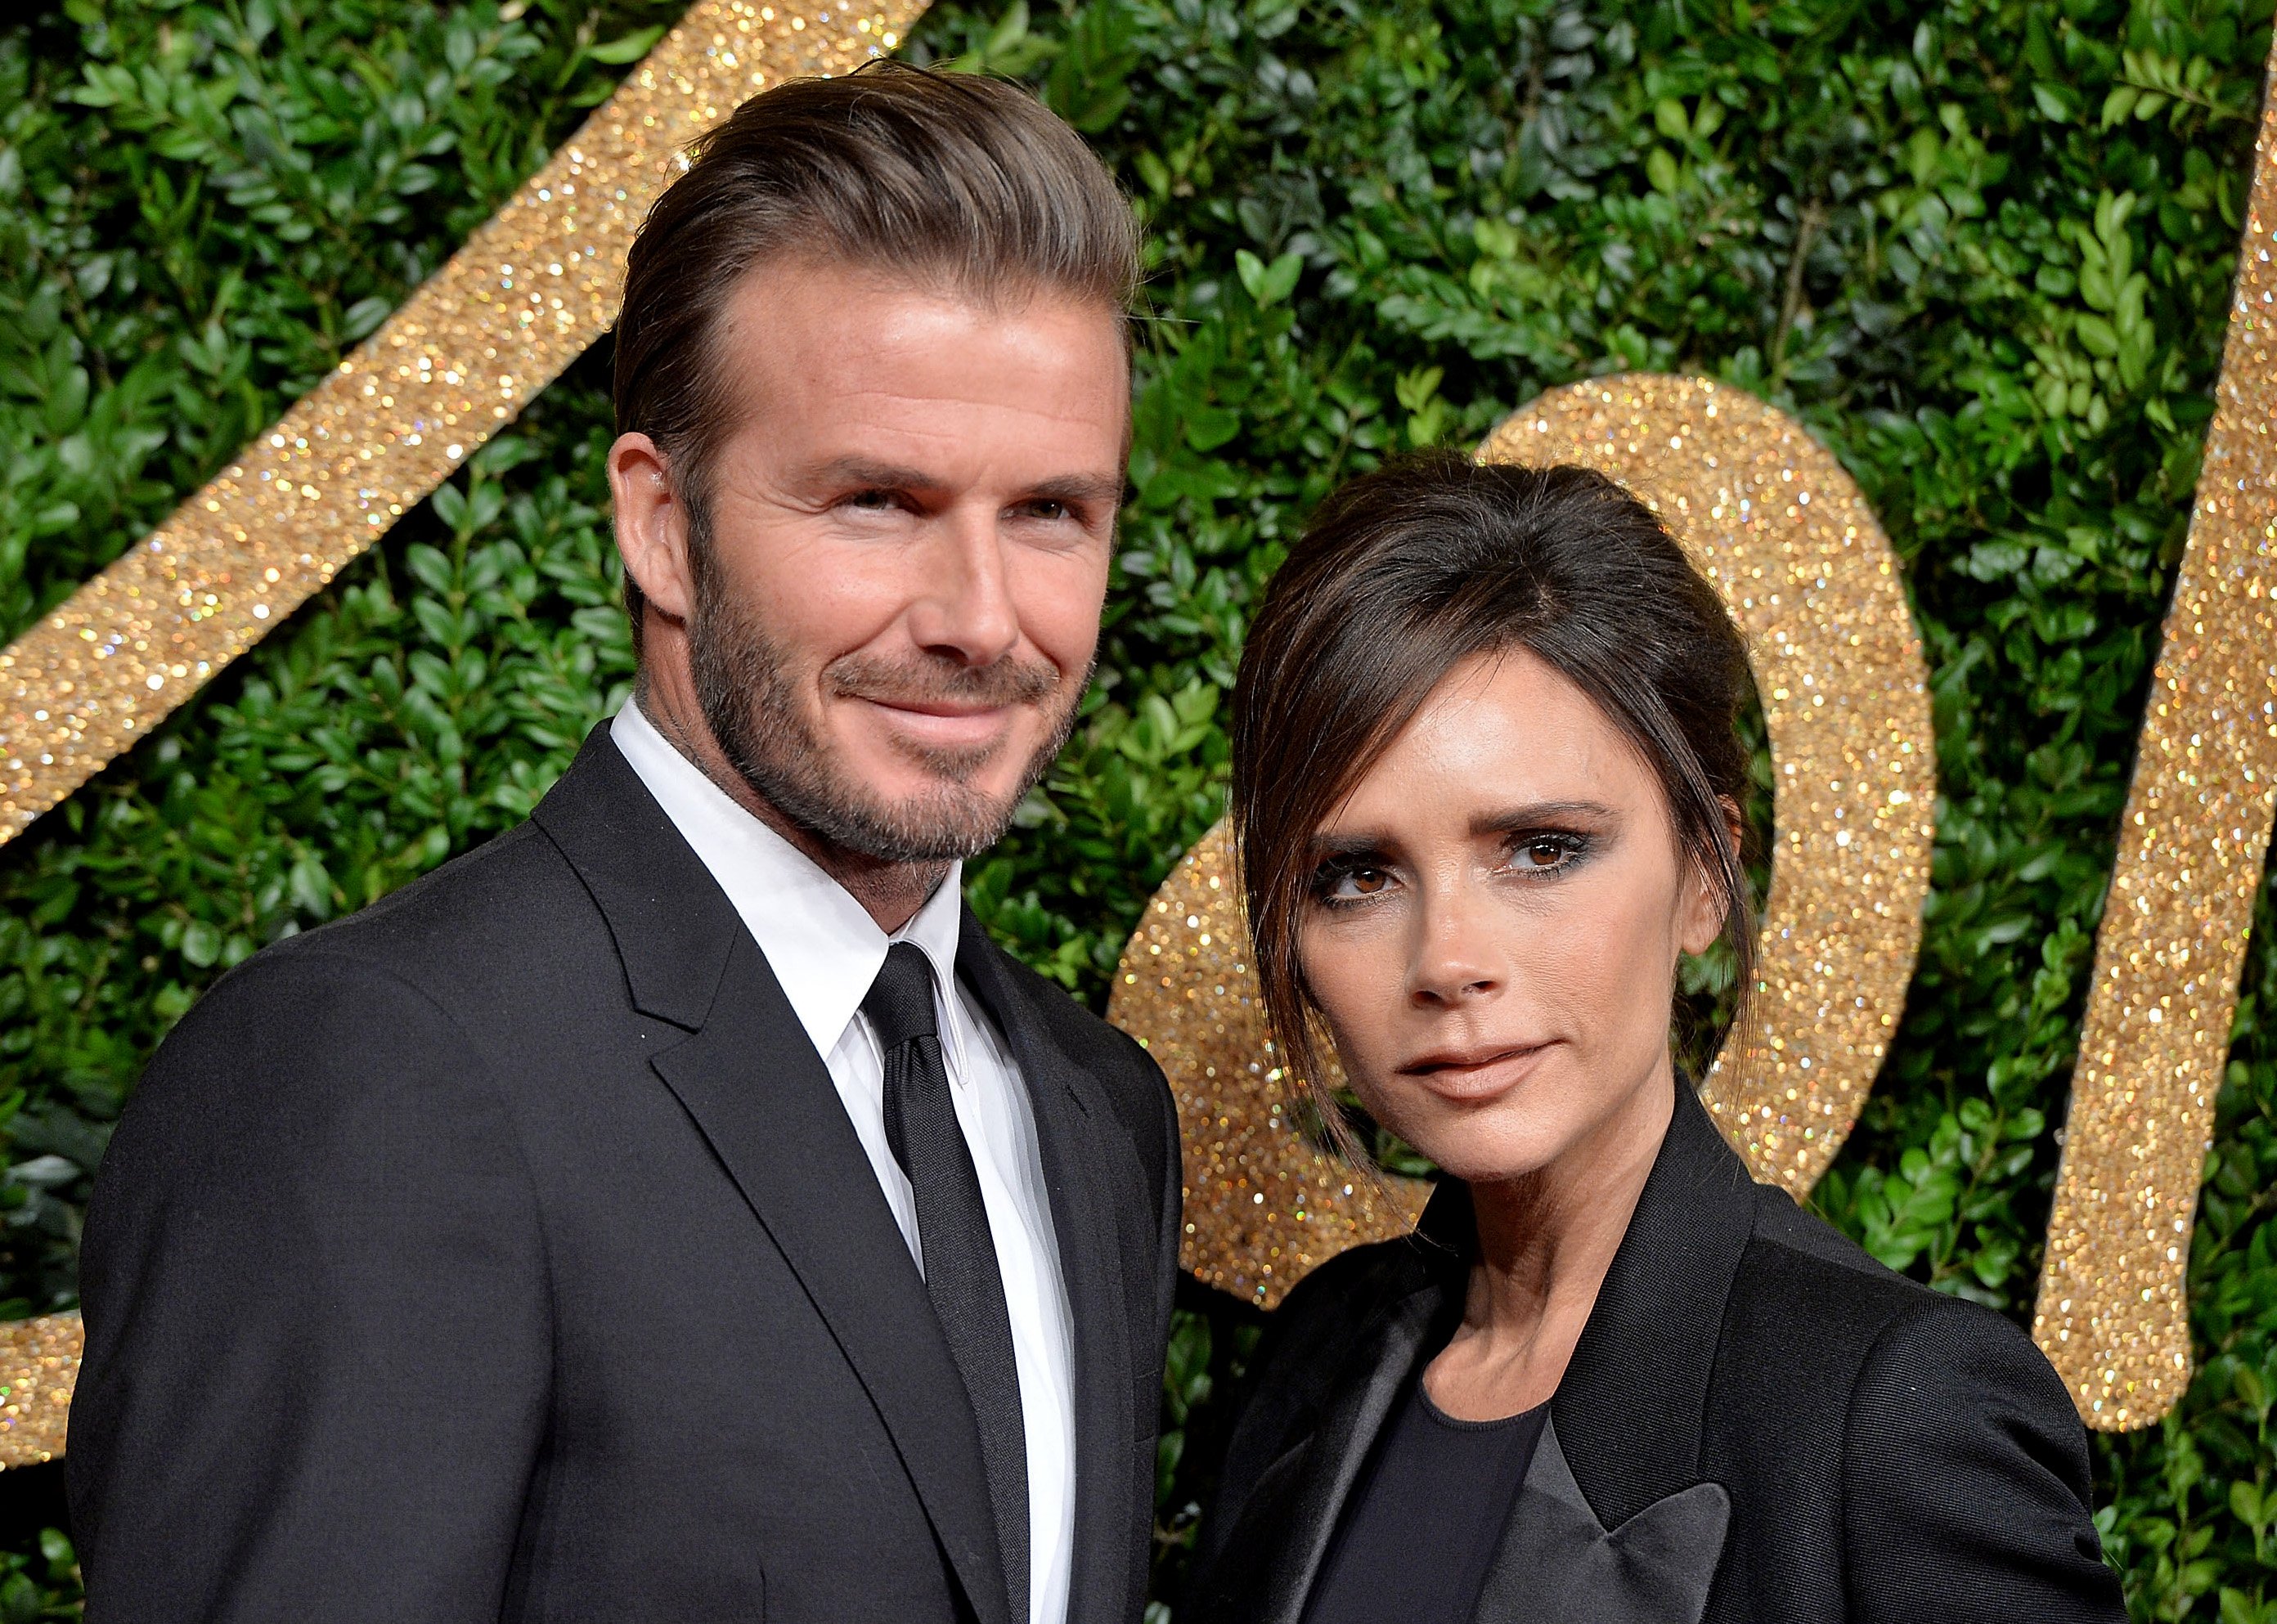 The power couple Victoria and David Beckham.